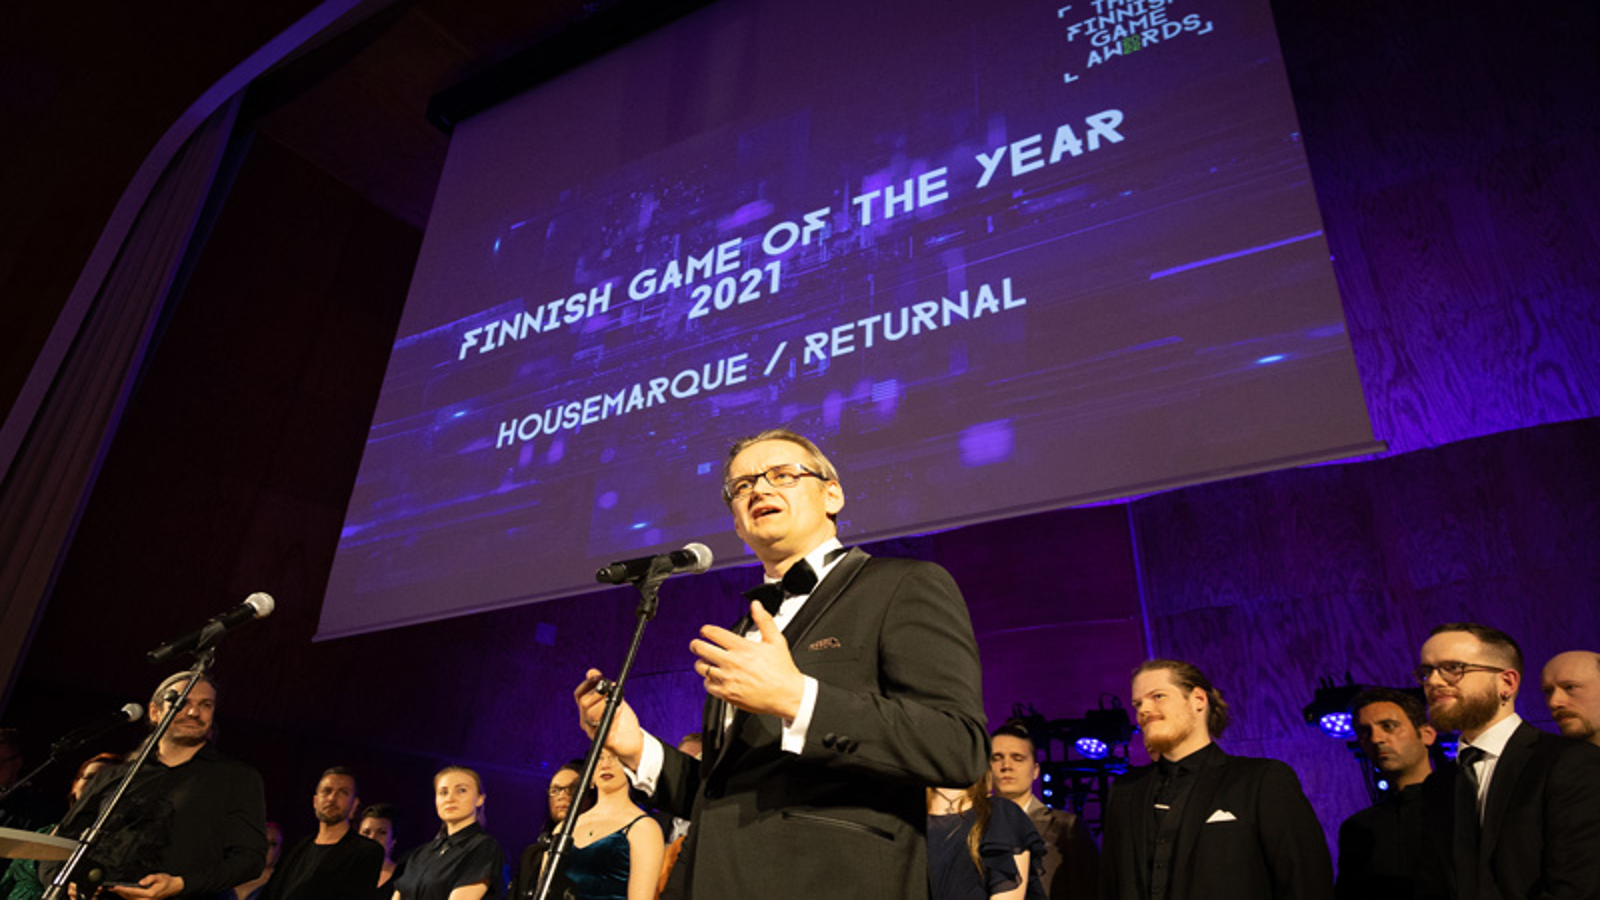 Returnal wins Game of the Year at Finnish Game Awards